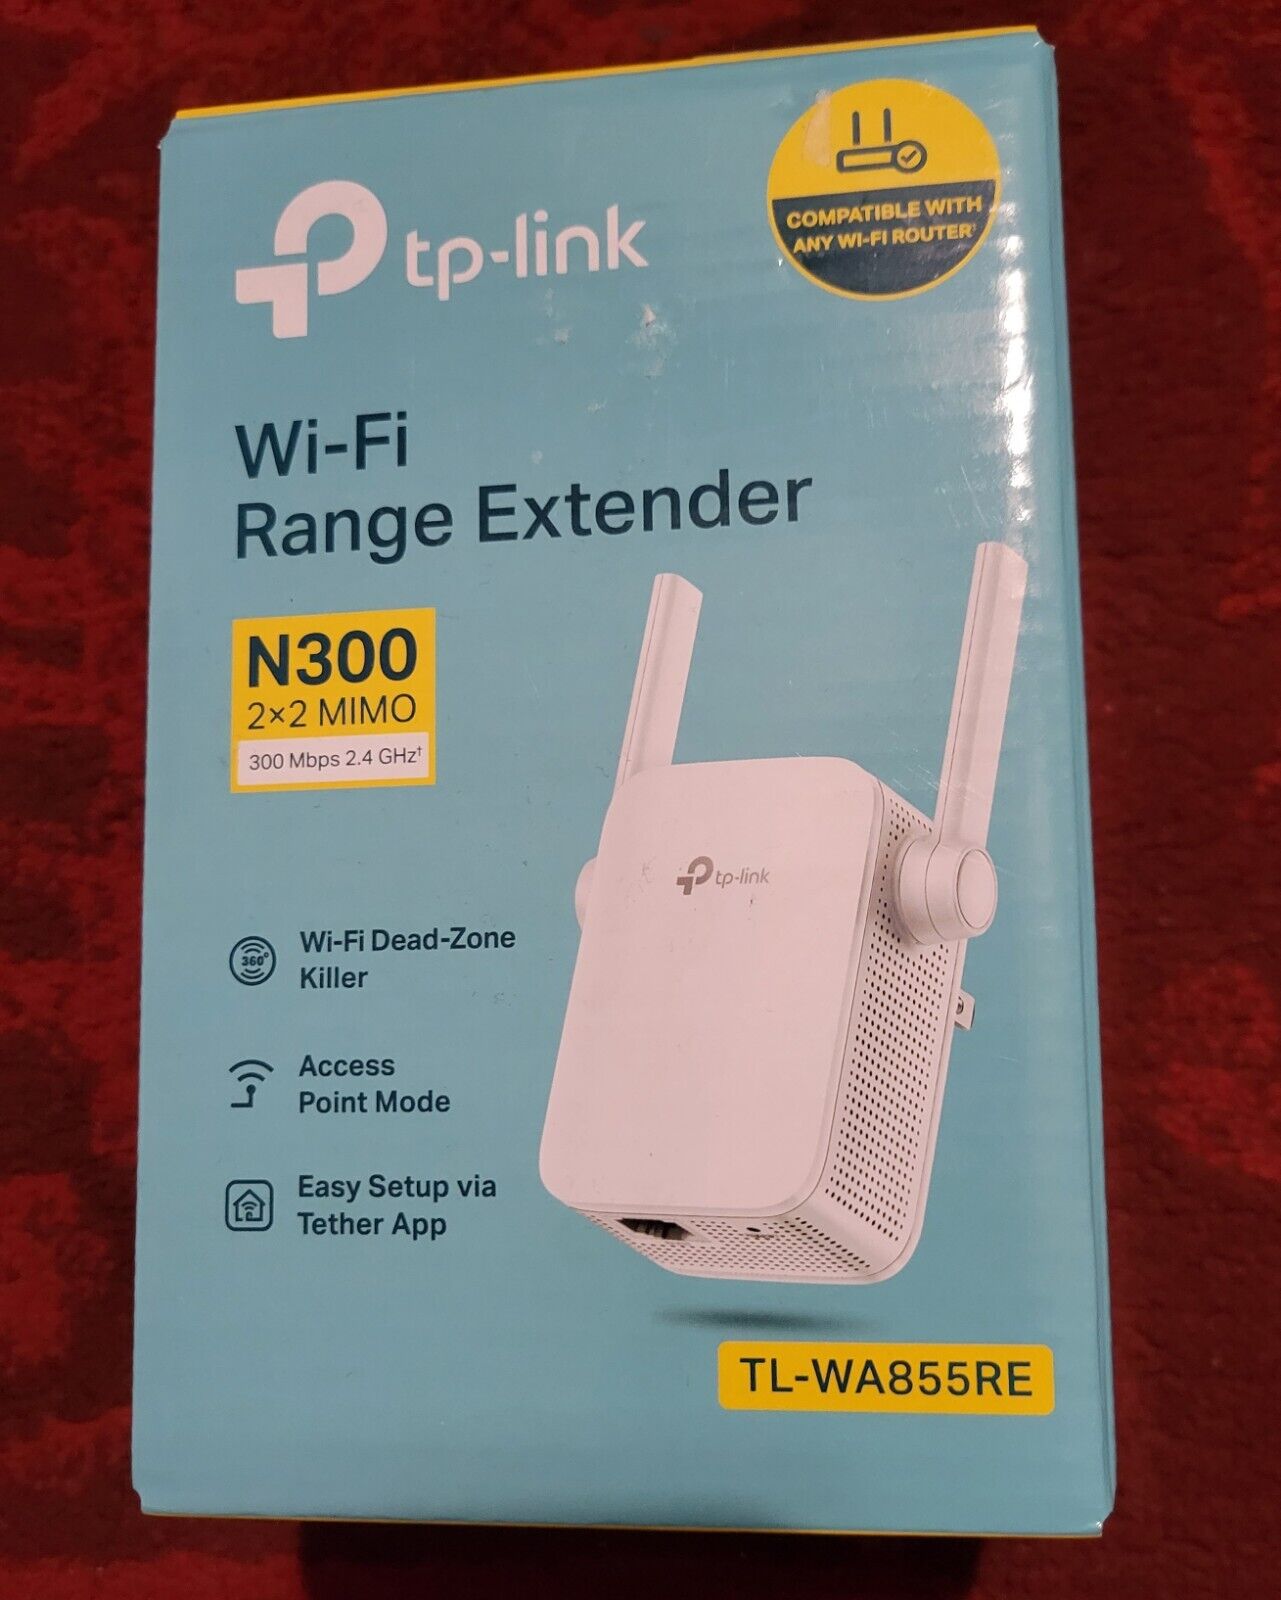 TP LINK WiFi Range Extender N300 2x2 MIMO 300MBPS 2.4 GHz Wireless Router